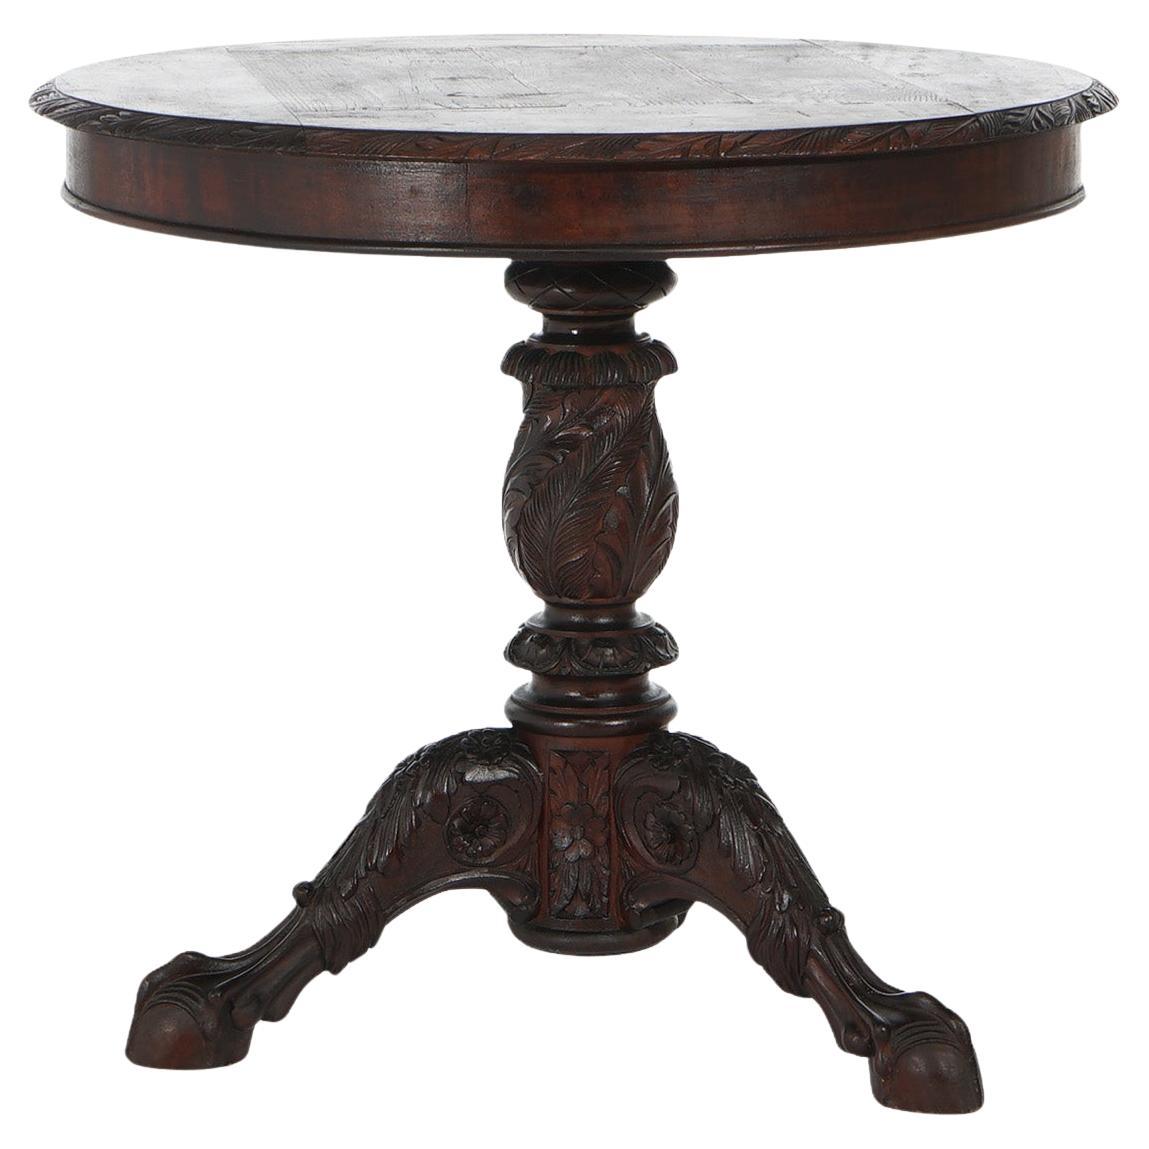 Antique Neoclassical American Empire Carved Mahogany Center Table C1840 For Sale